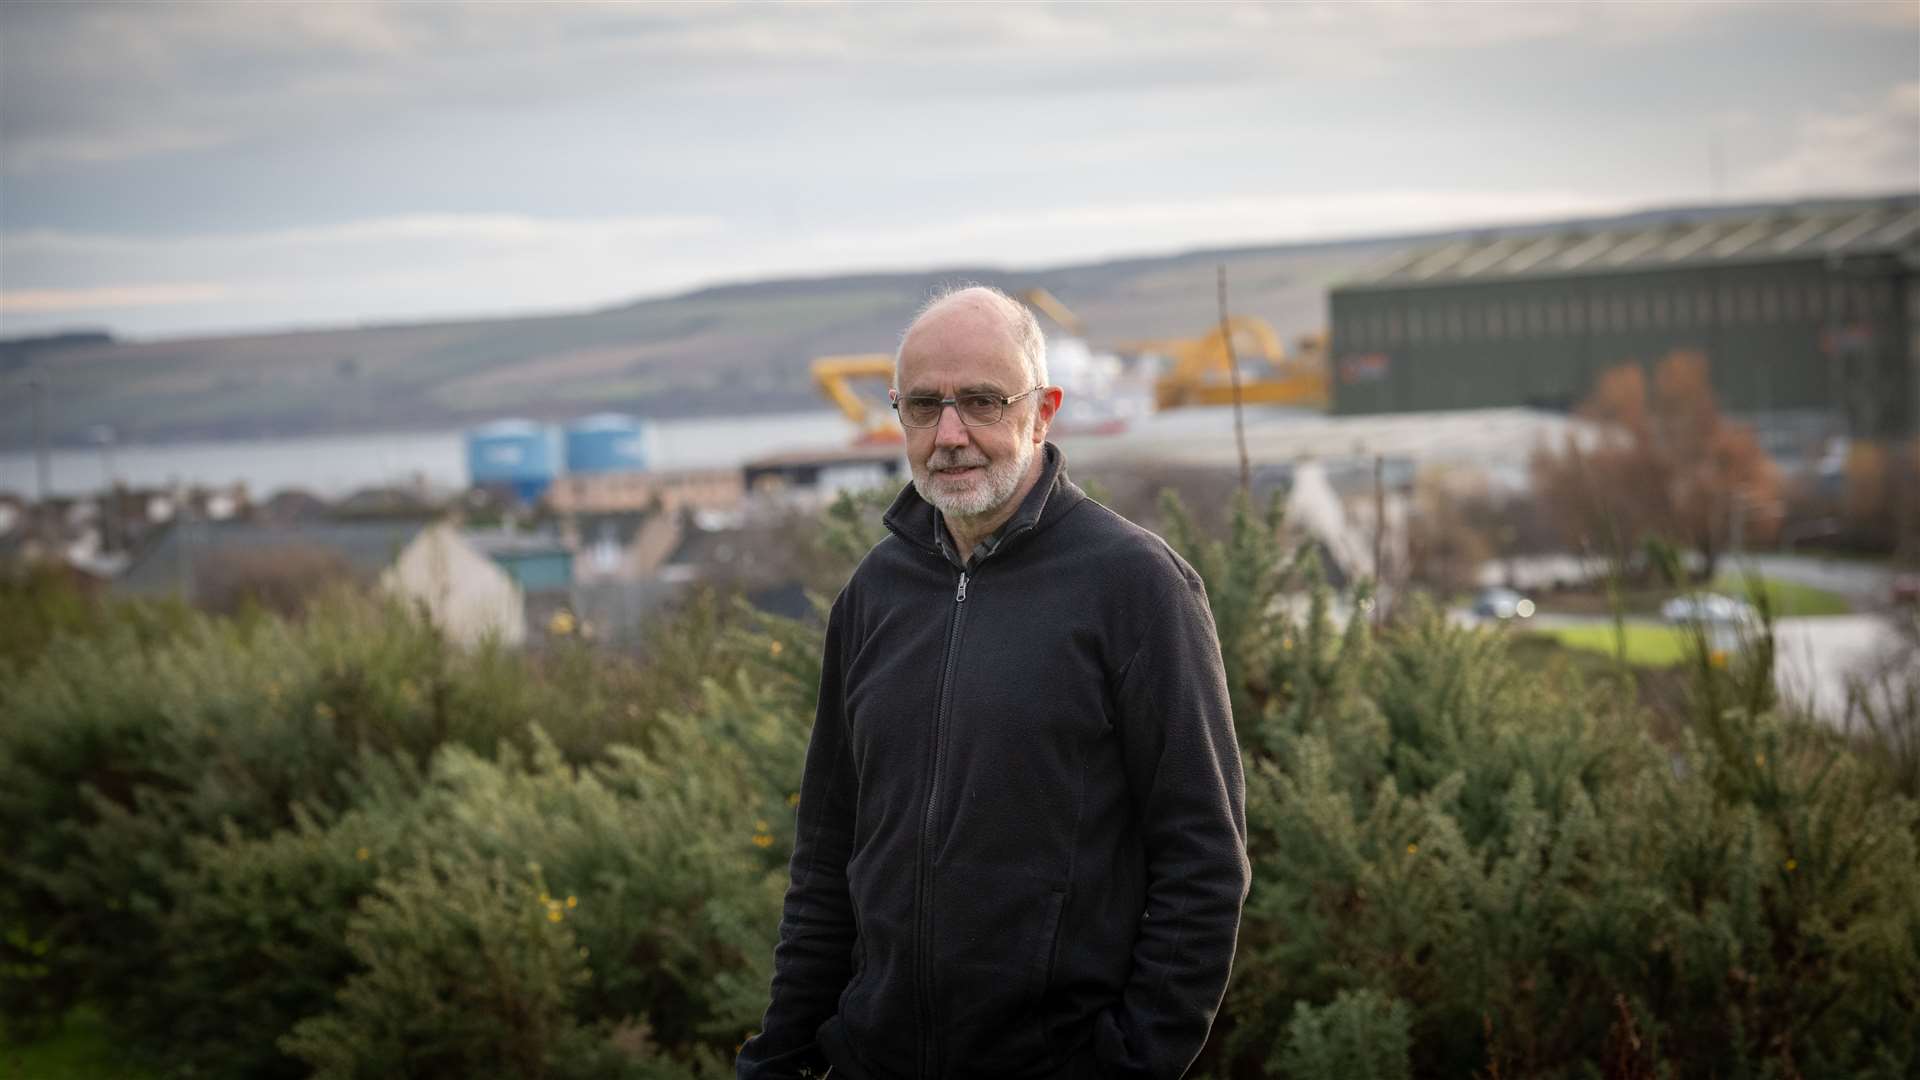 John McHardy in Invergordon. He has lived in Easter Ross for 60 years and has been at the heart of efforts to expand provision of affordable housing. Picture: Callum Mackay.